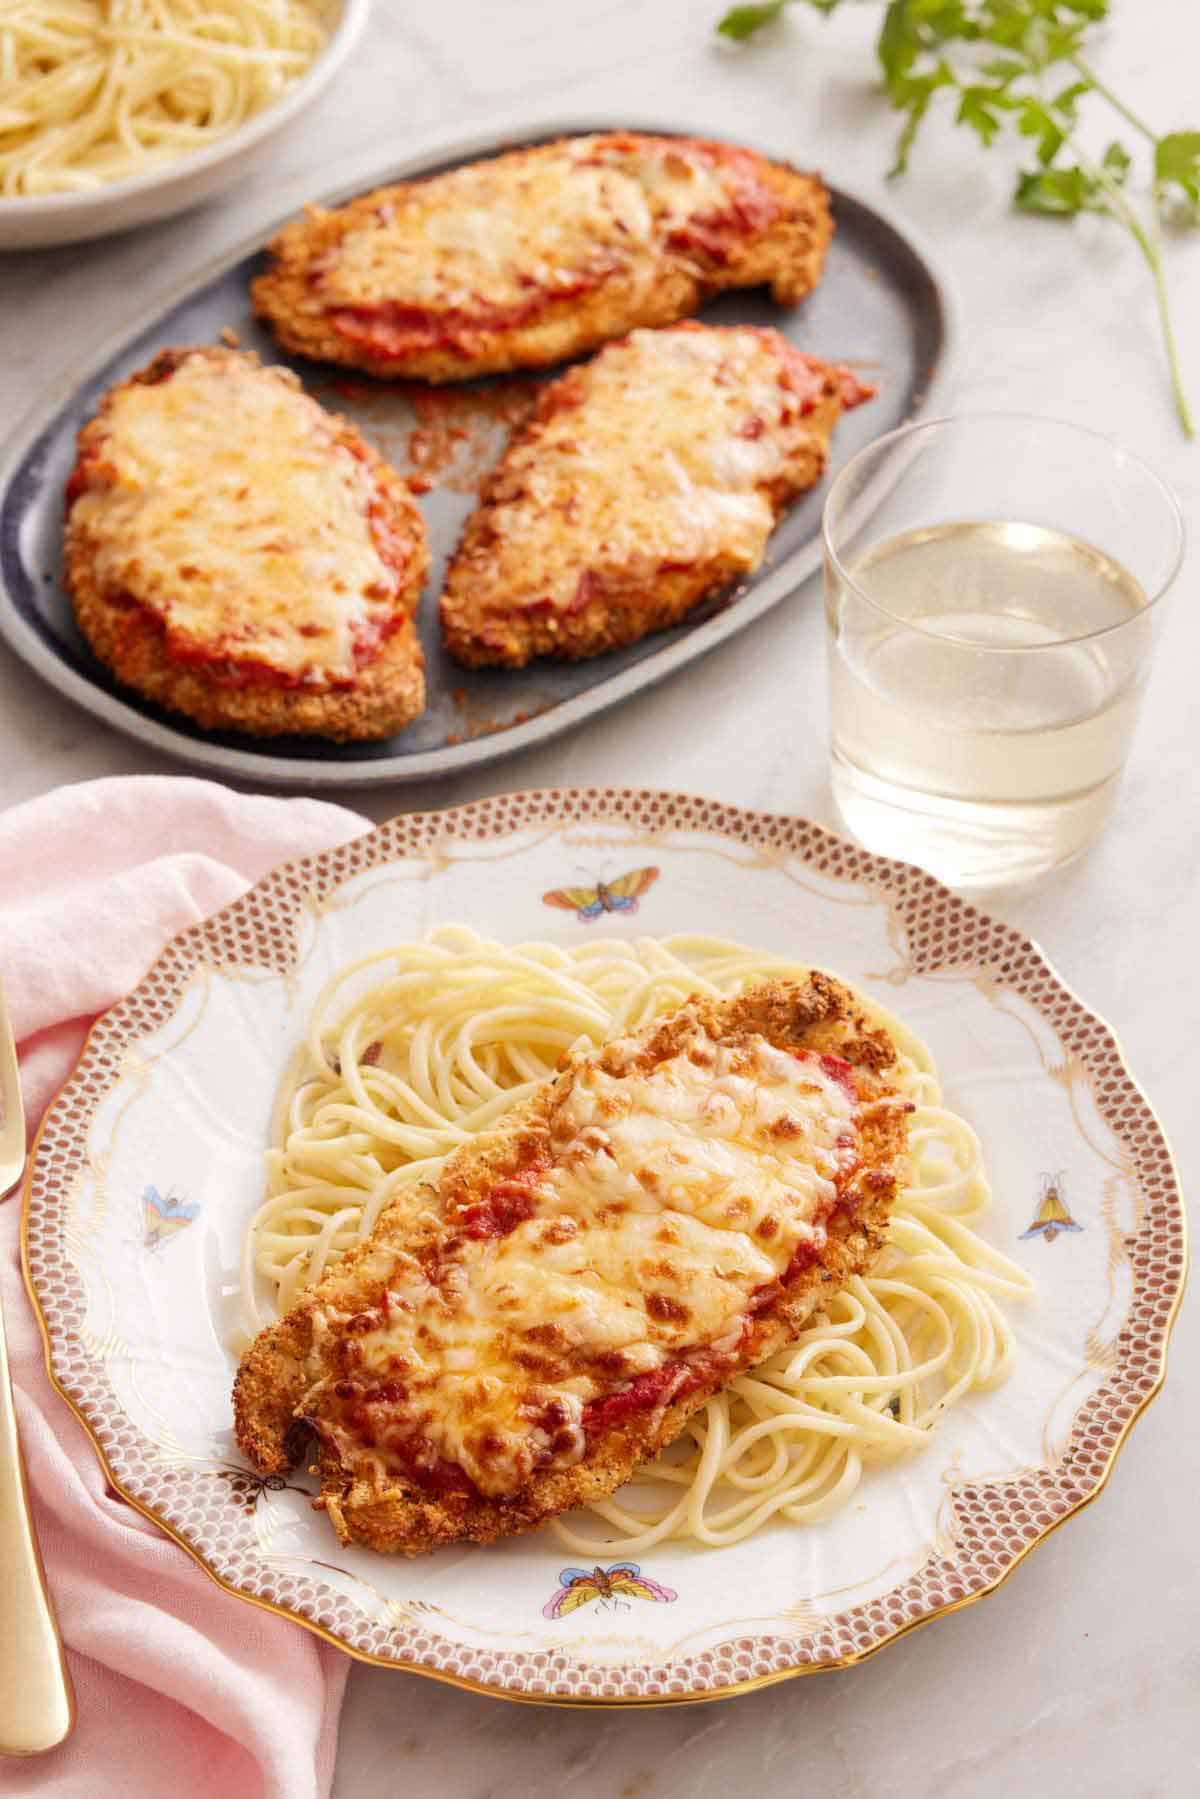 A plate with spaghetti noodles with air fryer chicken parmesan on top. A glass of wine and a platter with three air fryer chicken parmesan in the background.